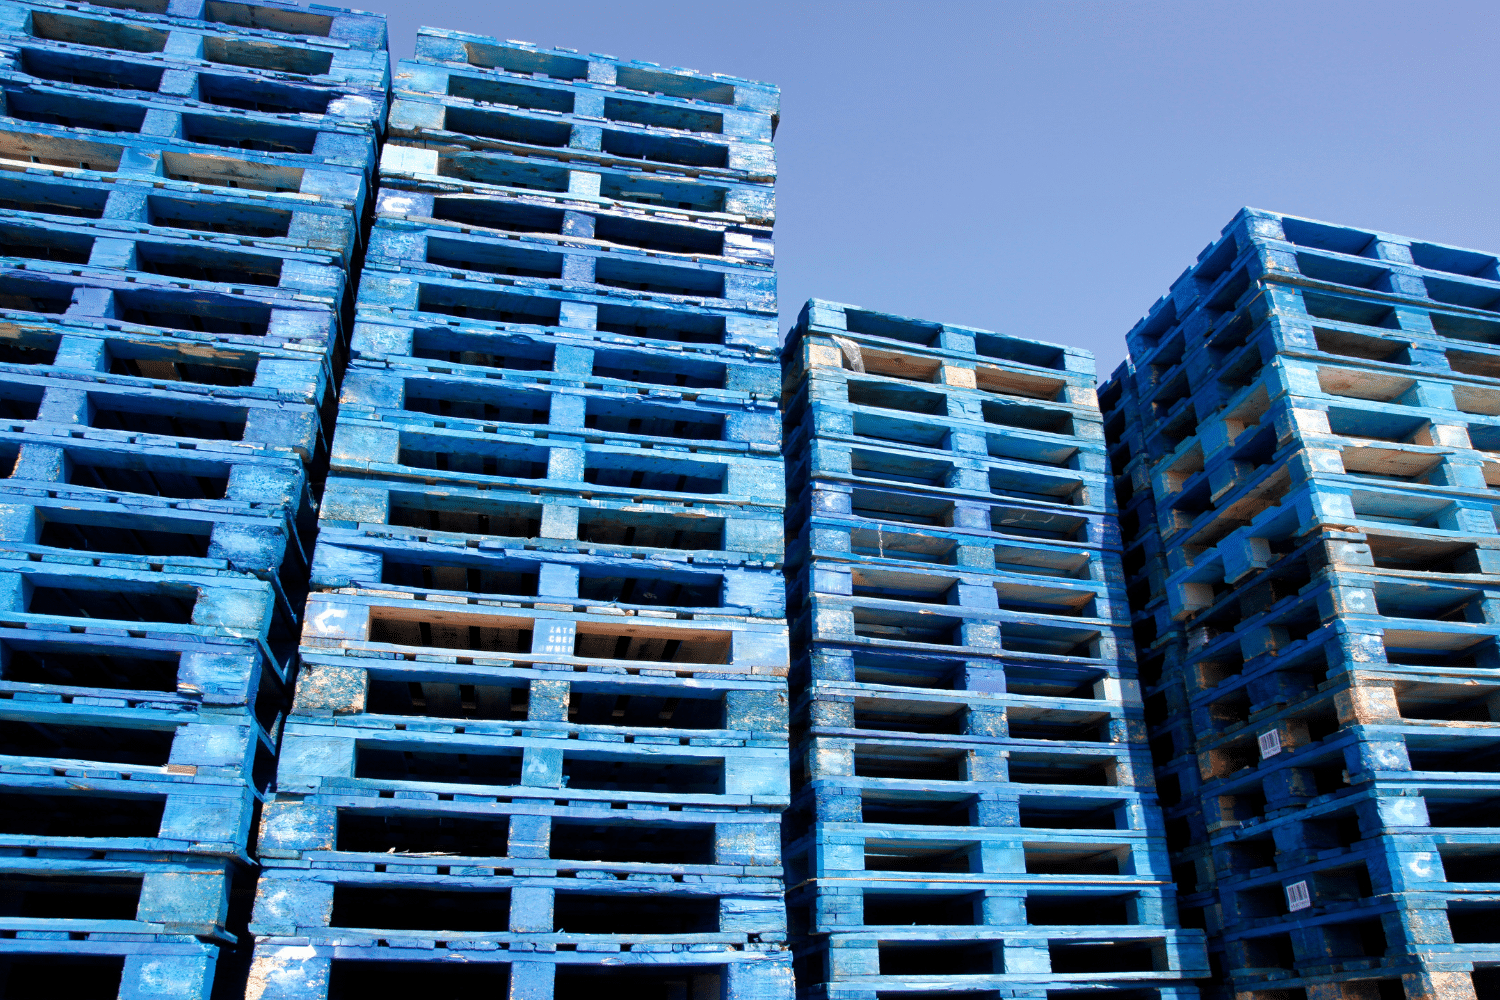 Towers of blue crates from Global supply chain company, CHEP, highlight how the company has adopted HOP to improve safety, engagement and how work is done.